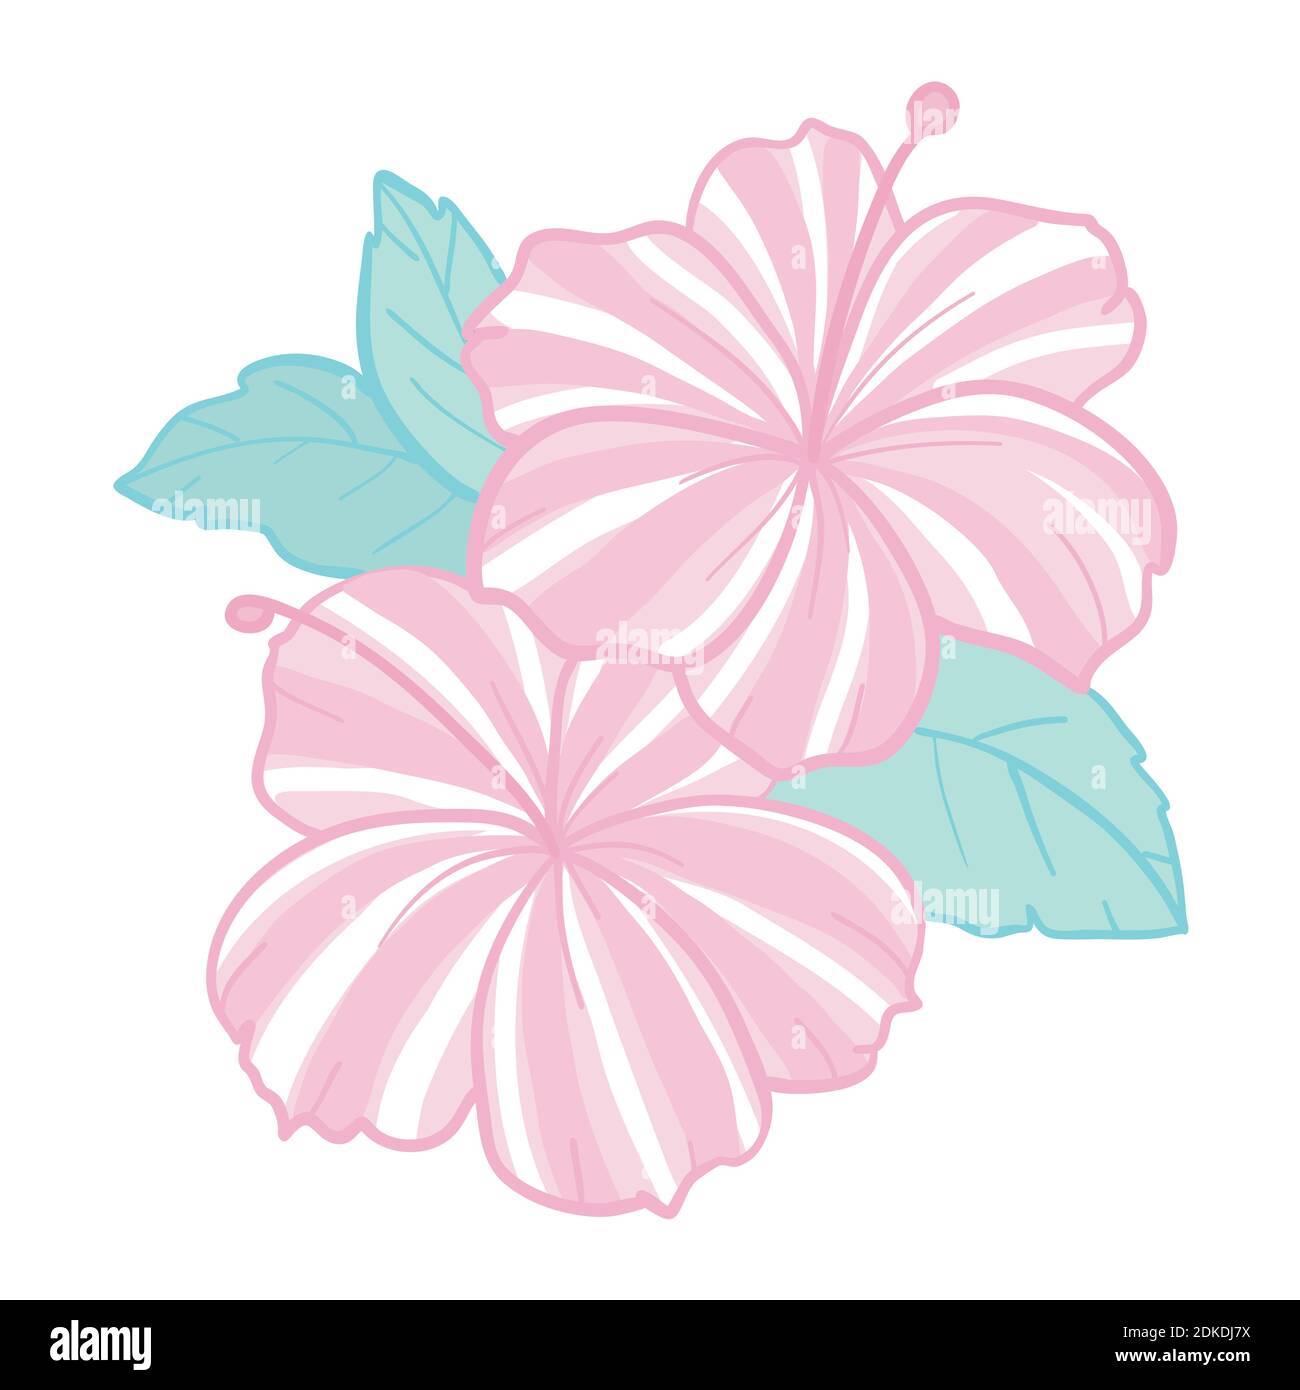 Tropical flowers elements. Collection of hibiscus flowers on a white background. Vector illustration bundle. Stock Vector